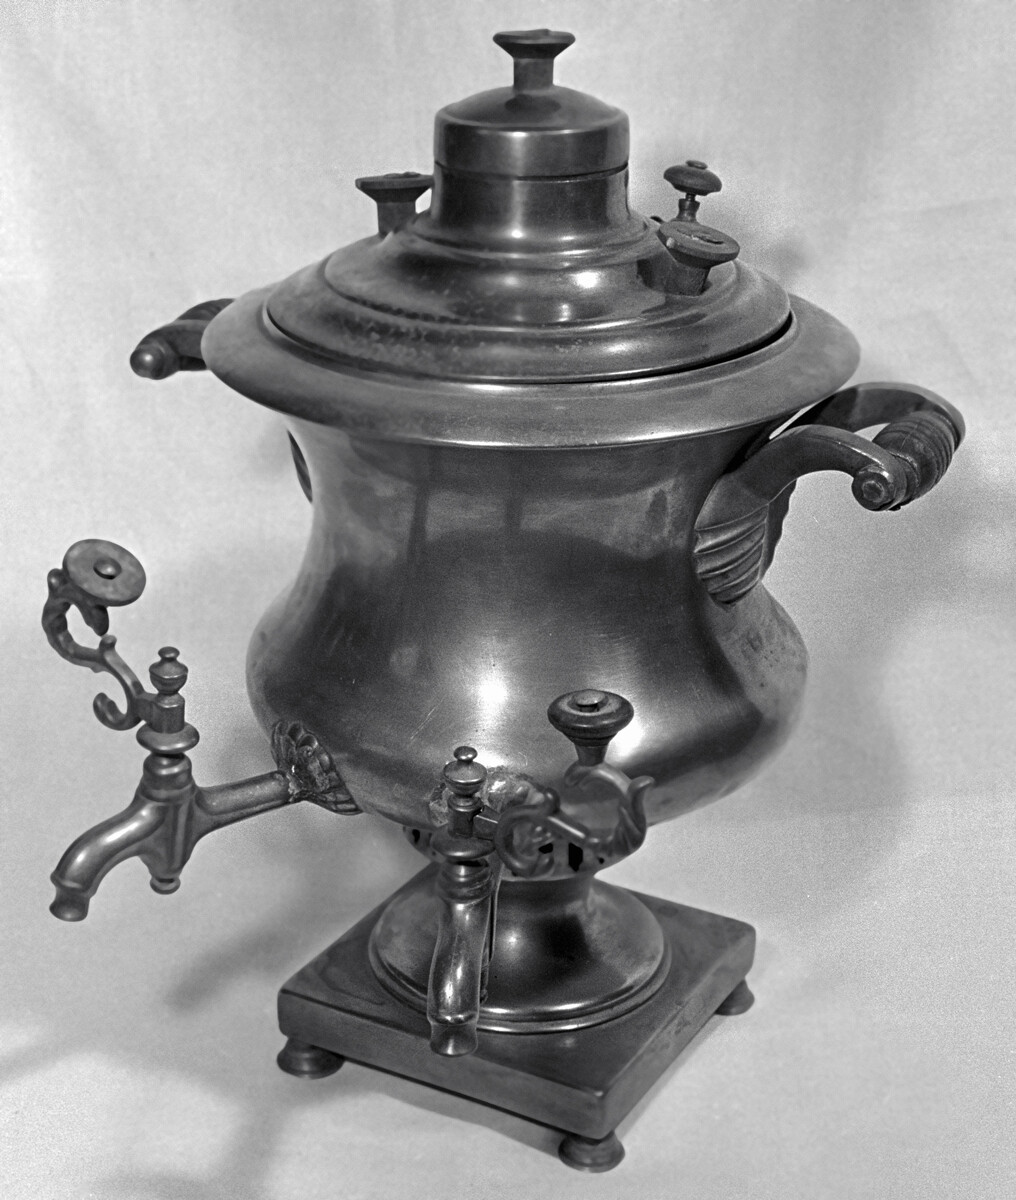 A samovar with two taps for tea and coffee made in the early 19th century. 